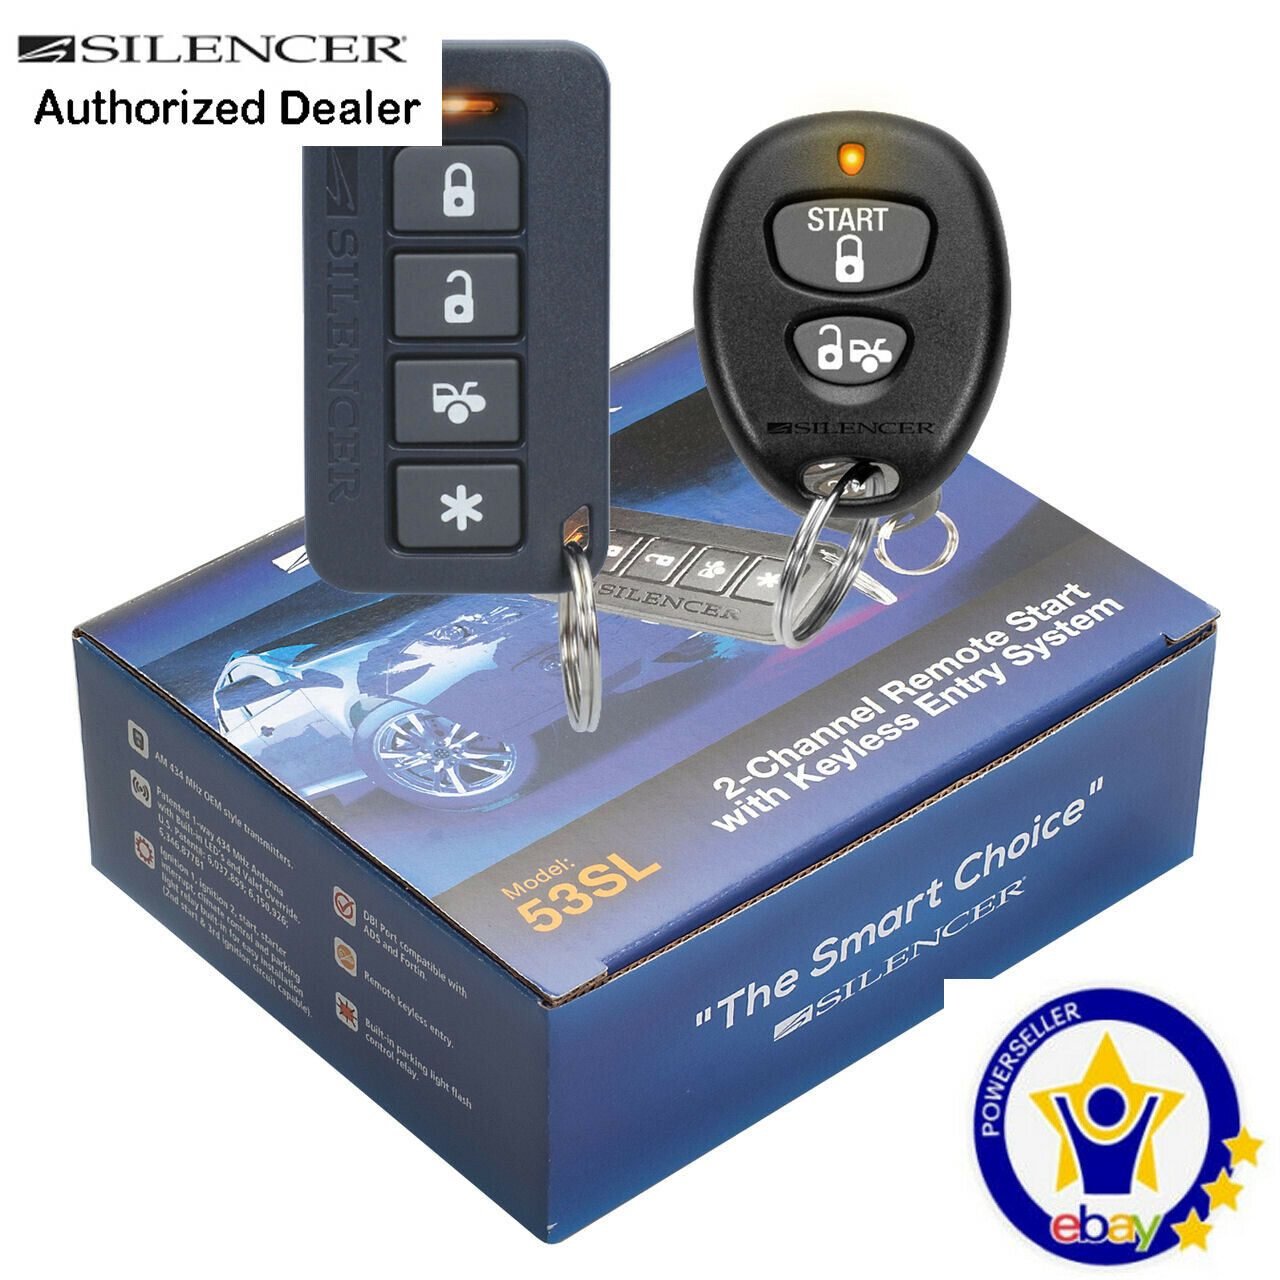 Silencer 53sl One-way Remote Starter And Keyless Entry System